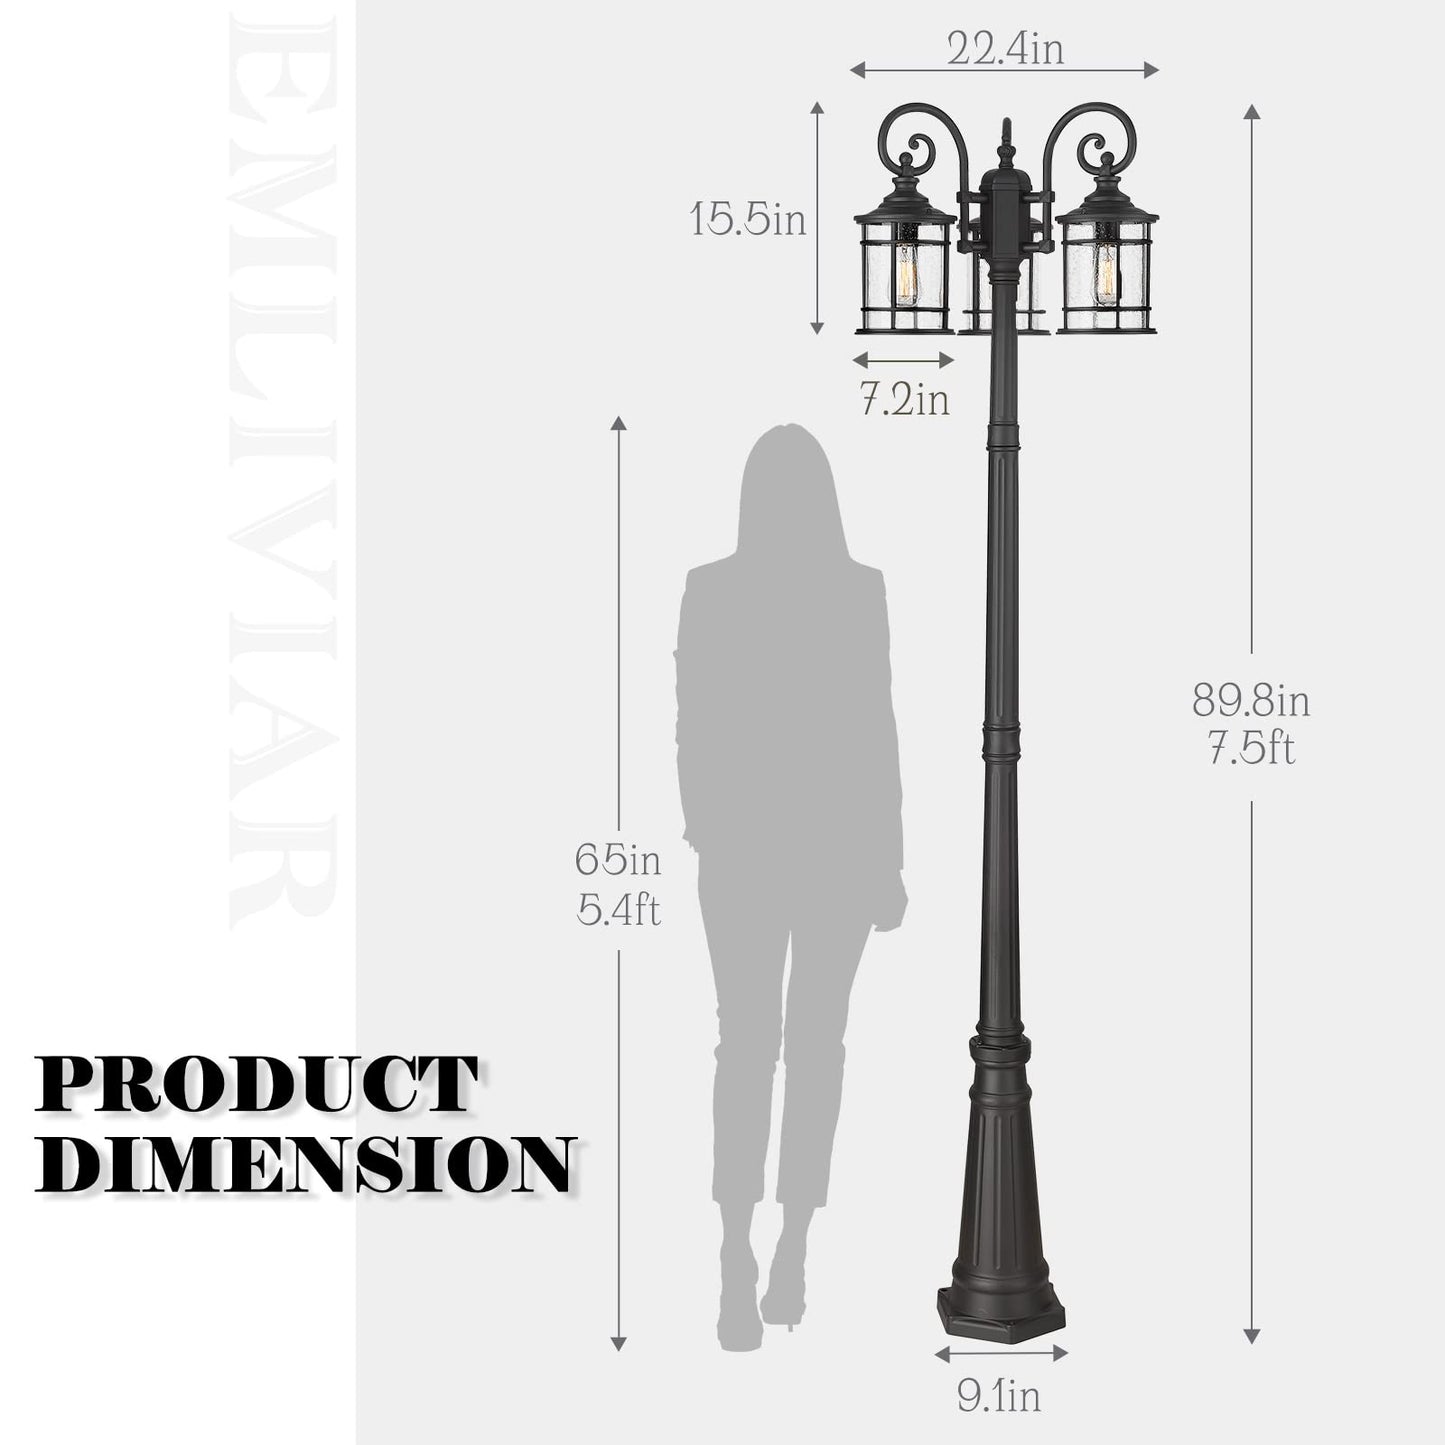 
                  
                    Emliviar Industrial Street Light, 3-HeadOutdoor Post Lamp for Driveway House, Carriage Lantern Lamp Aluminum with Seeded Glass, Black Finish, XE229PL-3 BK
                  
                